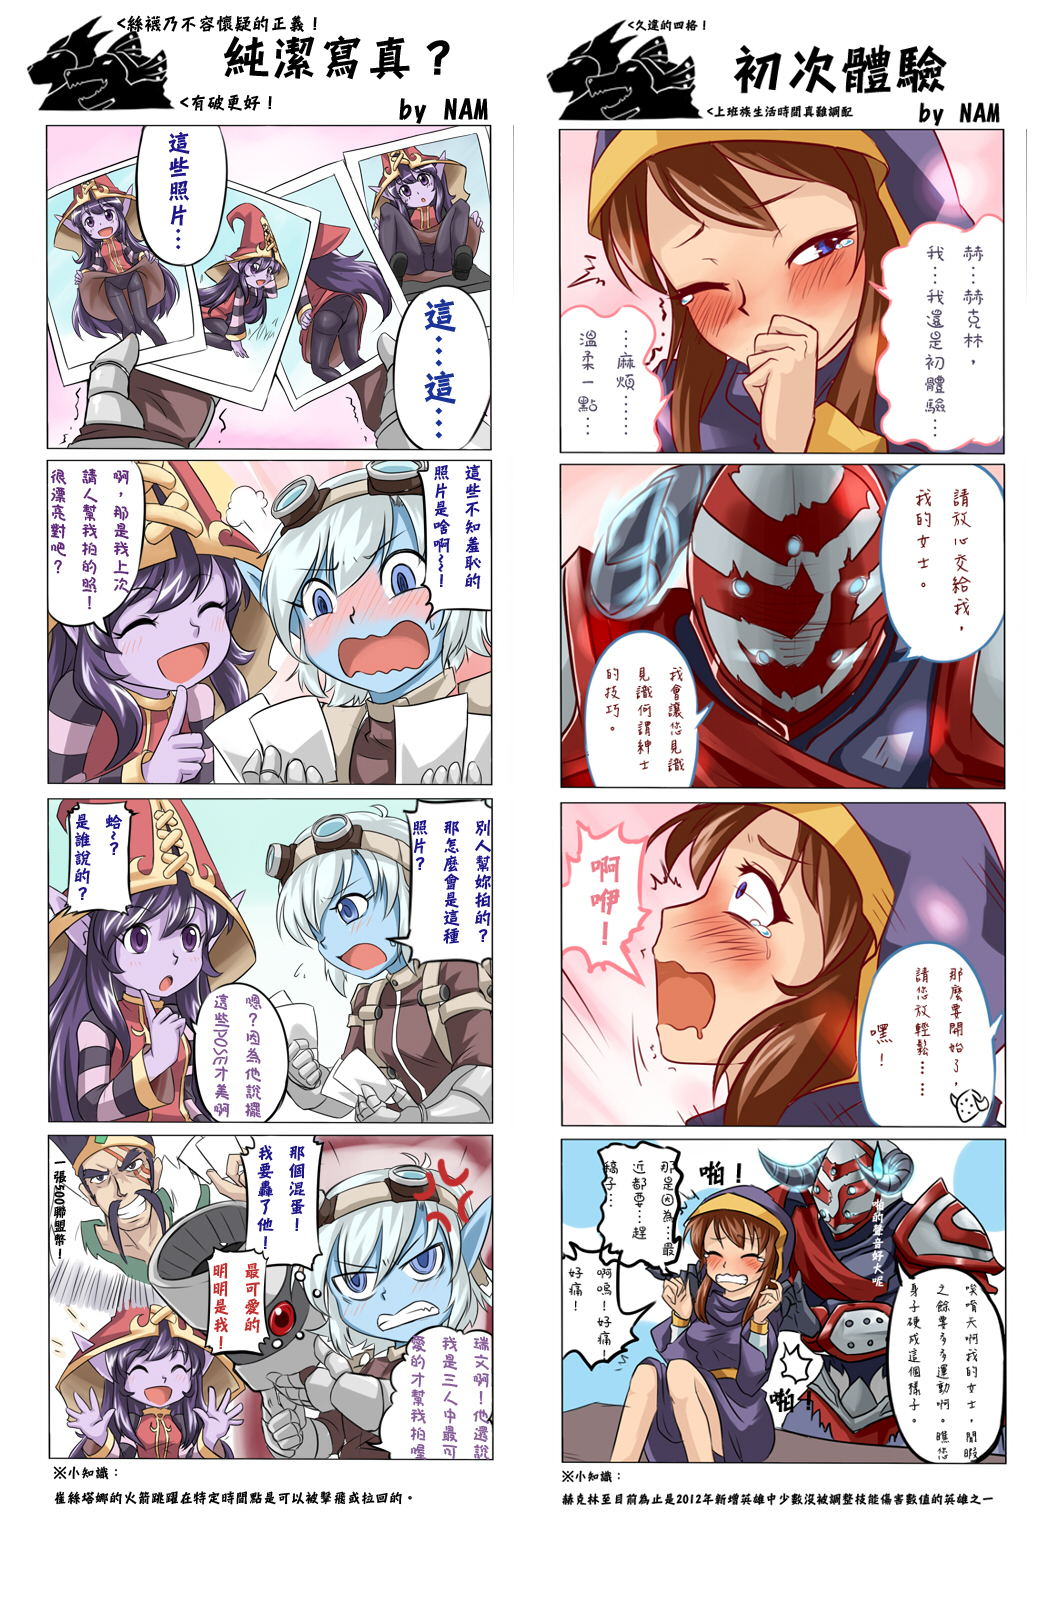 4koma alternate_costume angry artist_self-insert blue_eyes blush brown_hair cannon chinese comic draven dress drooling hecarim highres league_of_legends long_hair lulu_(league_of_legends) nam_(valckiry) panties pointy_ears purple_hair sexually_suggestive short_hair sweat tears thigh-highs tristana underwear violet_eyes white_hair